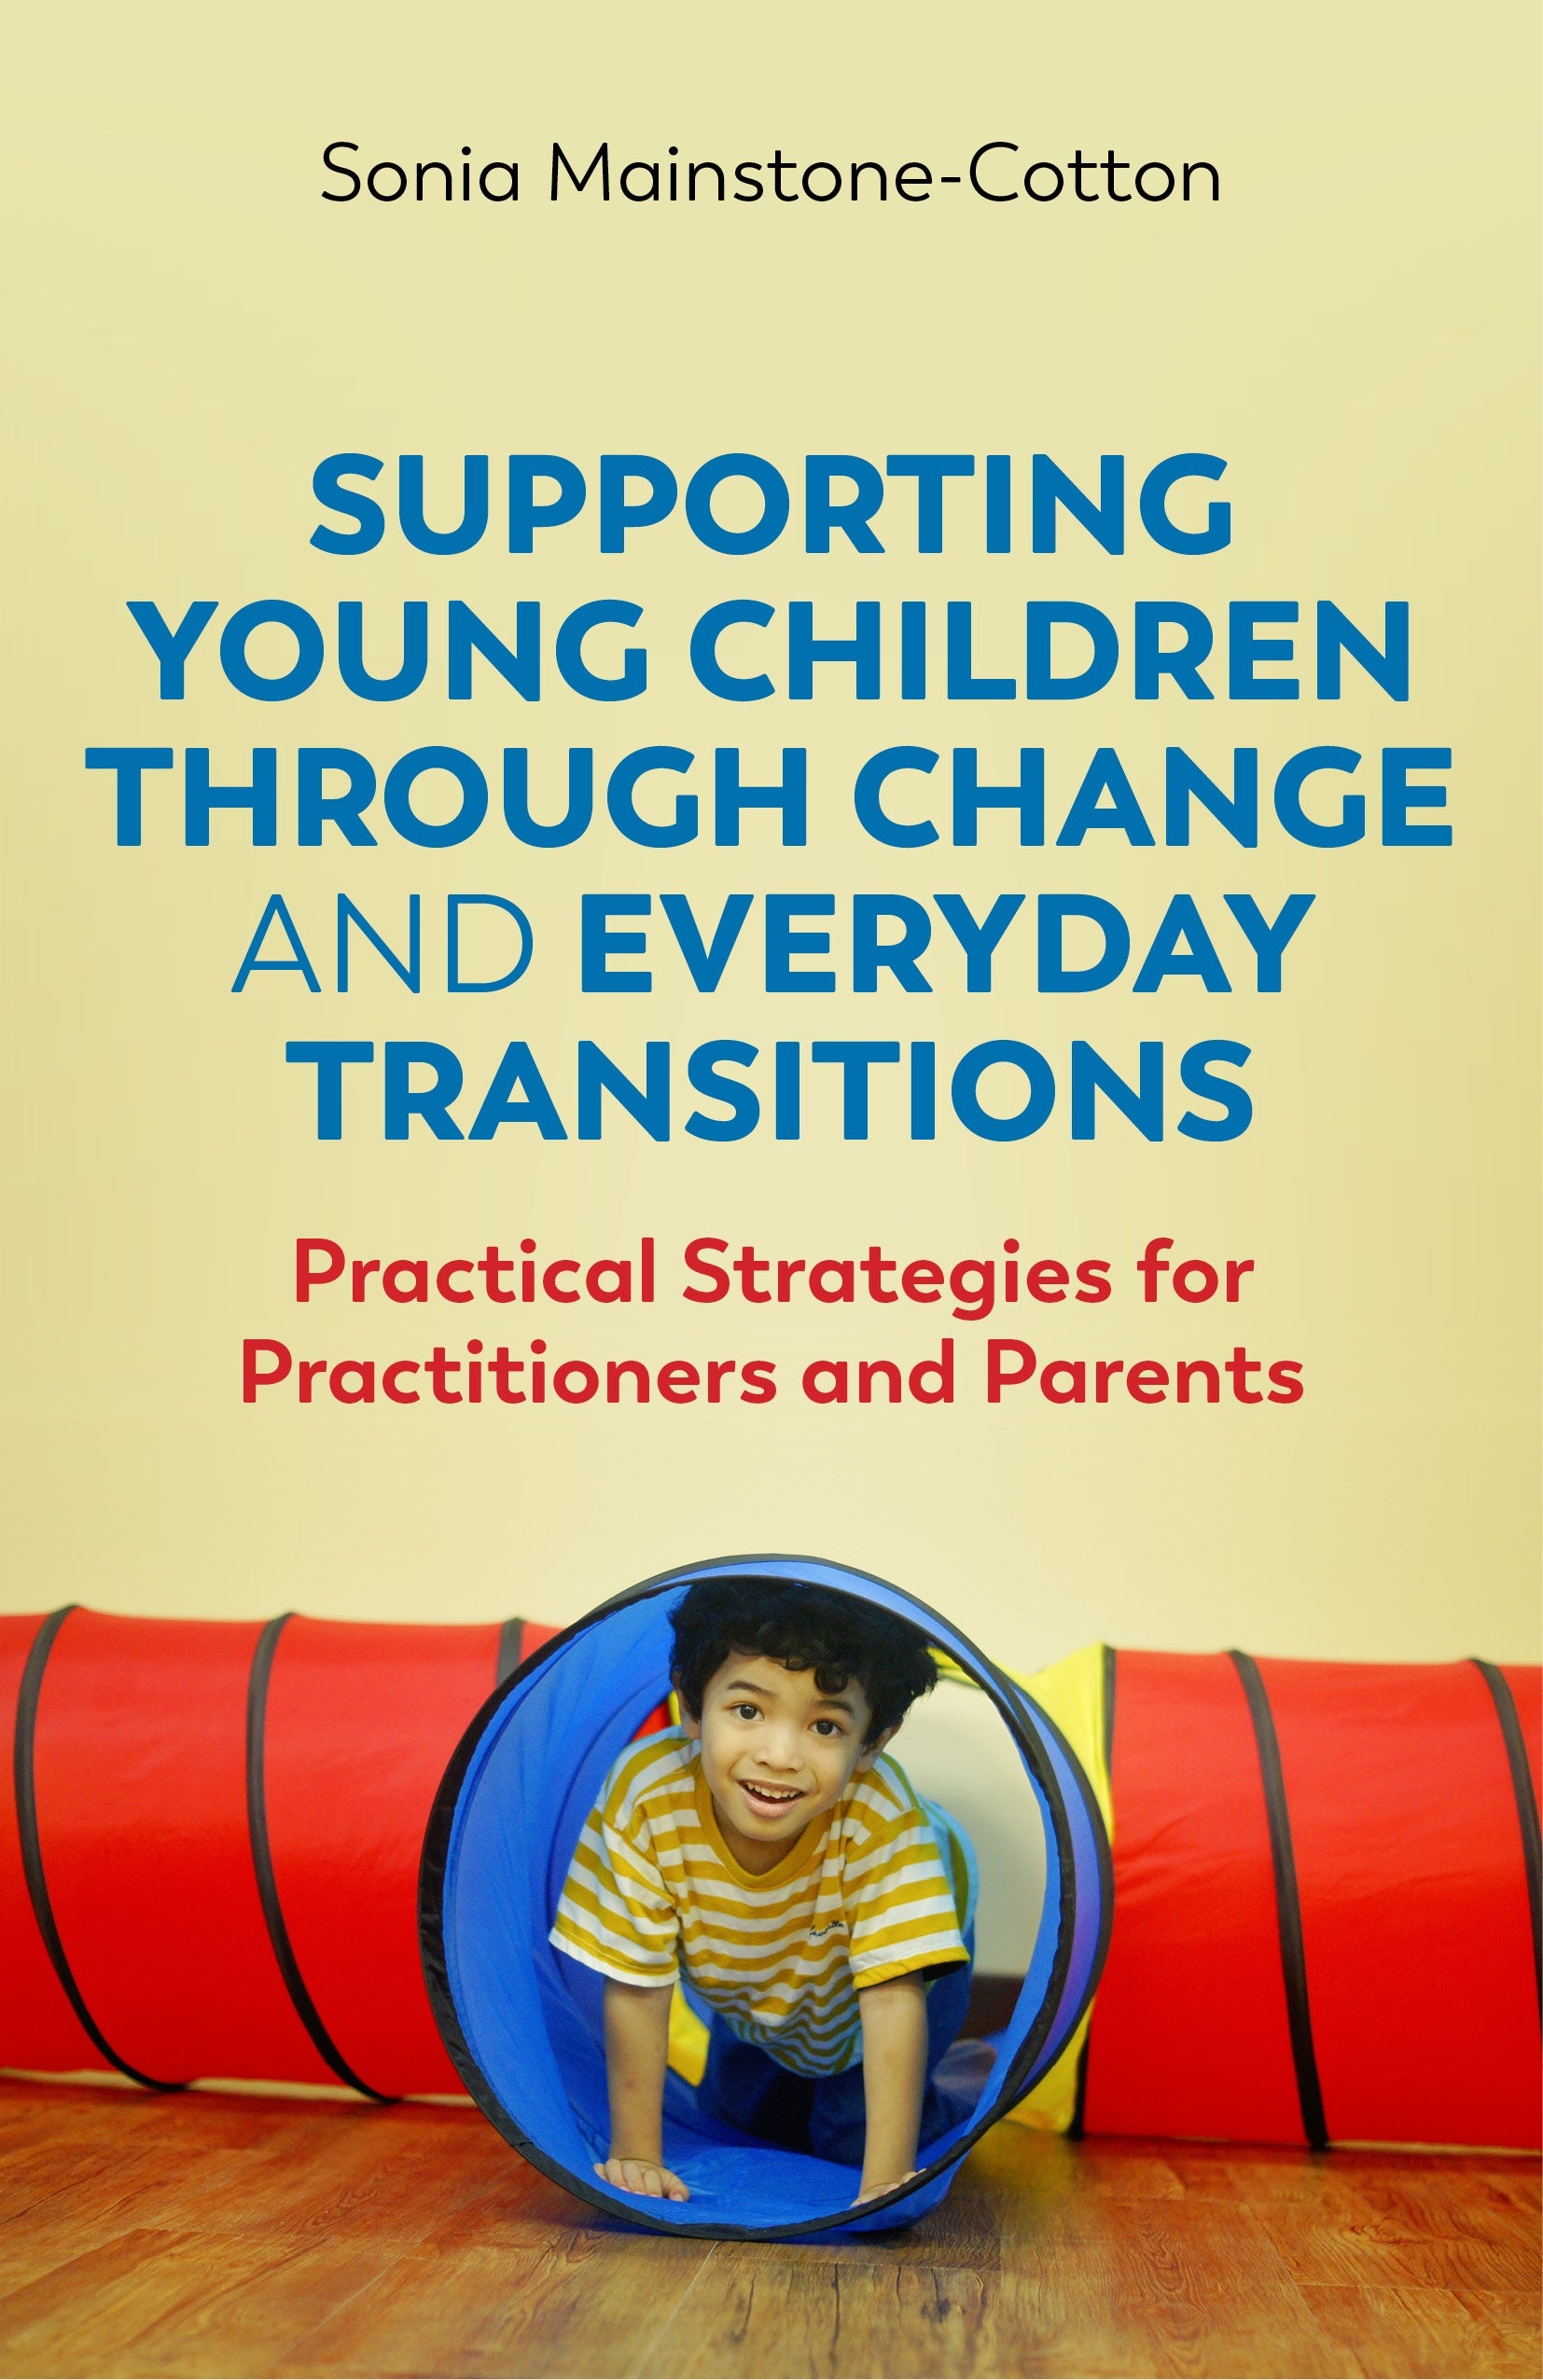 Supporting Young Children Through Change and Everyday Transitions by Sonia Mainstone-Cotton